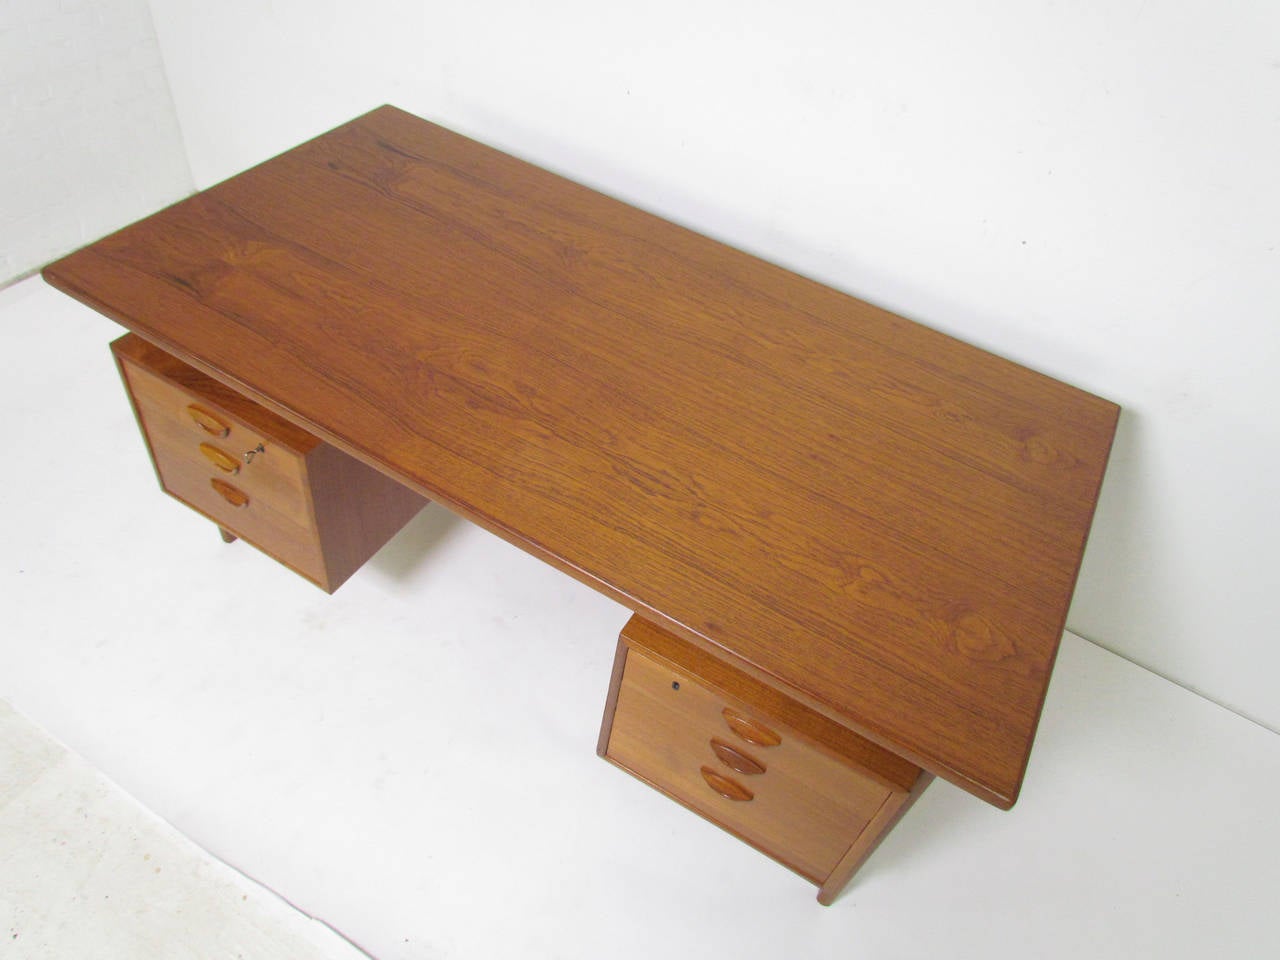 Teak desk by Kai Kristiansen, designed in 1958 for Feldballes Mobelfabrik, Denmark. Six drawers featuring Kristiansen's signature carved handles. Includes original key which opens top drawers on either side. Suspended teak top, and finished back